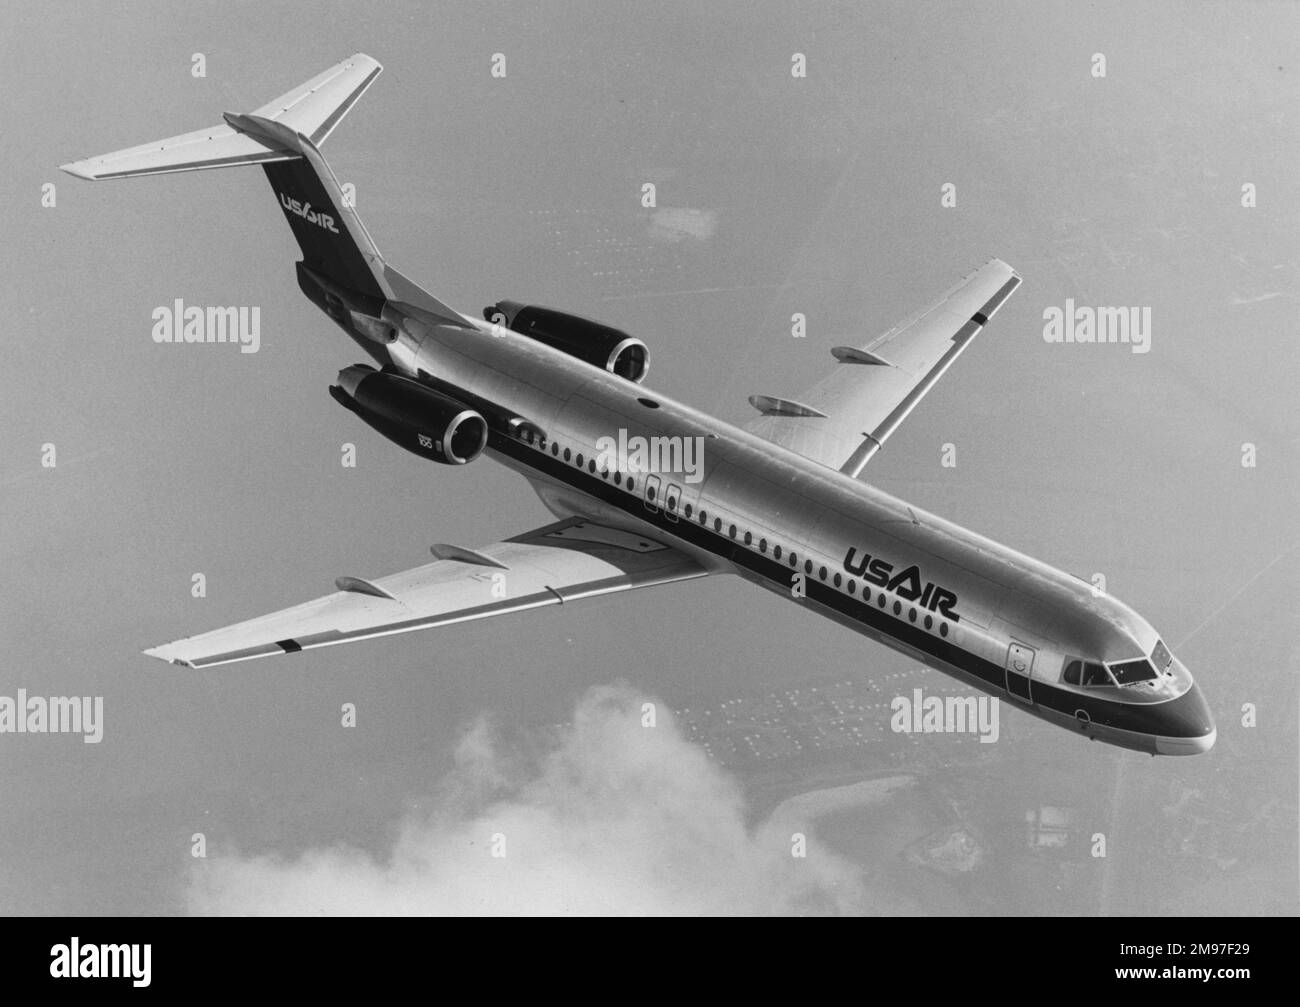 Fokker 100-US Air. Stock Photo